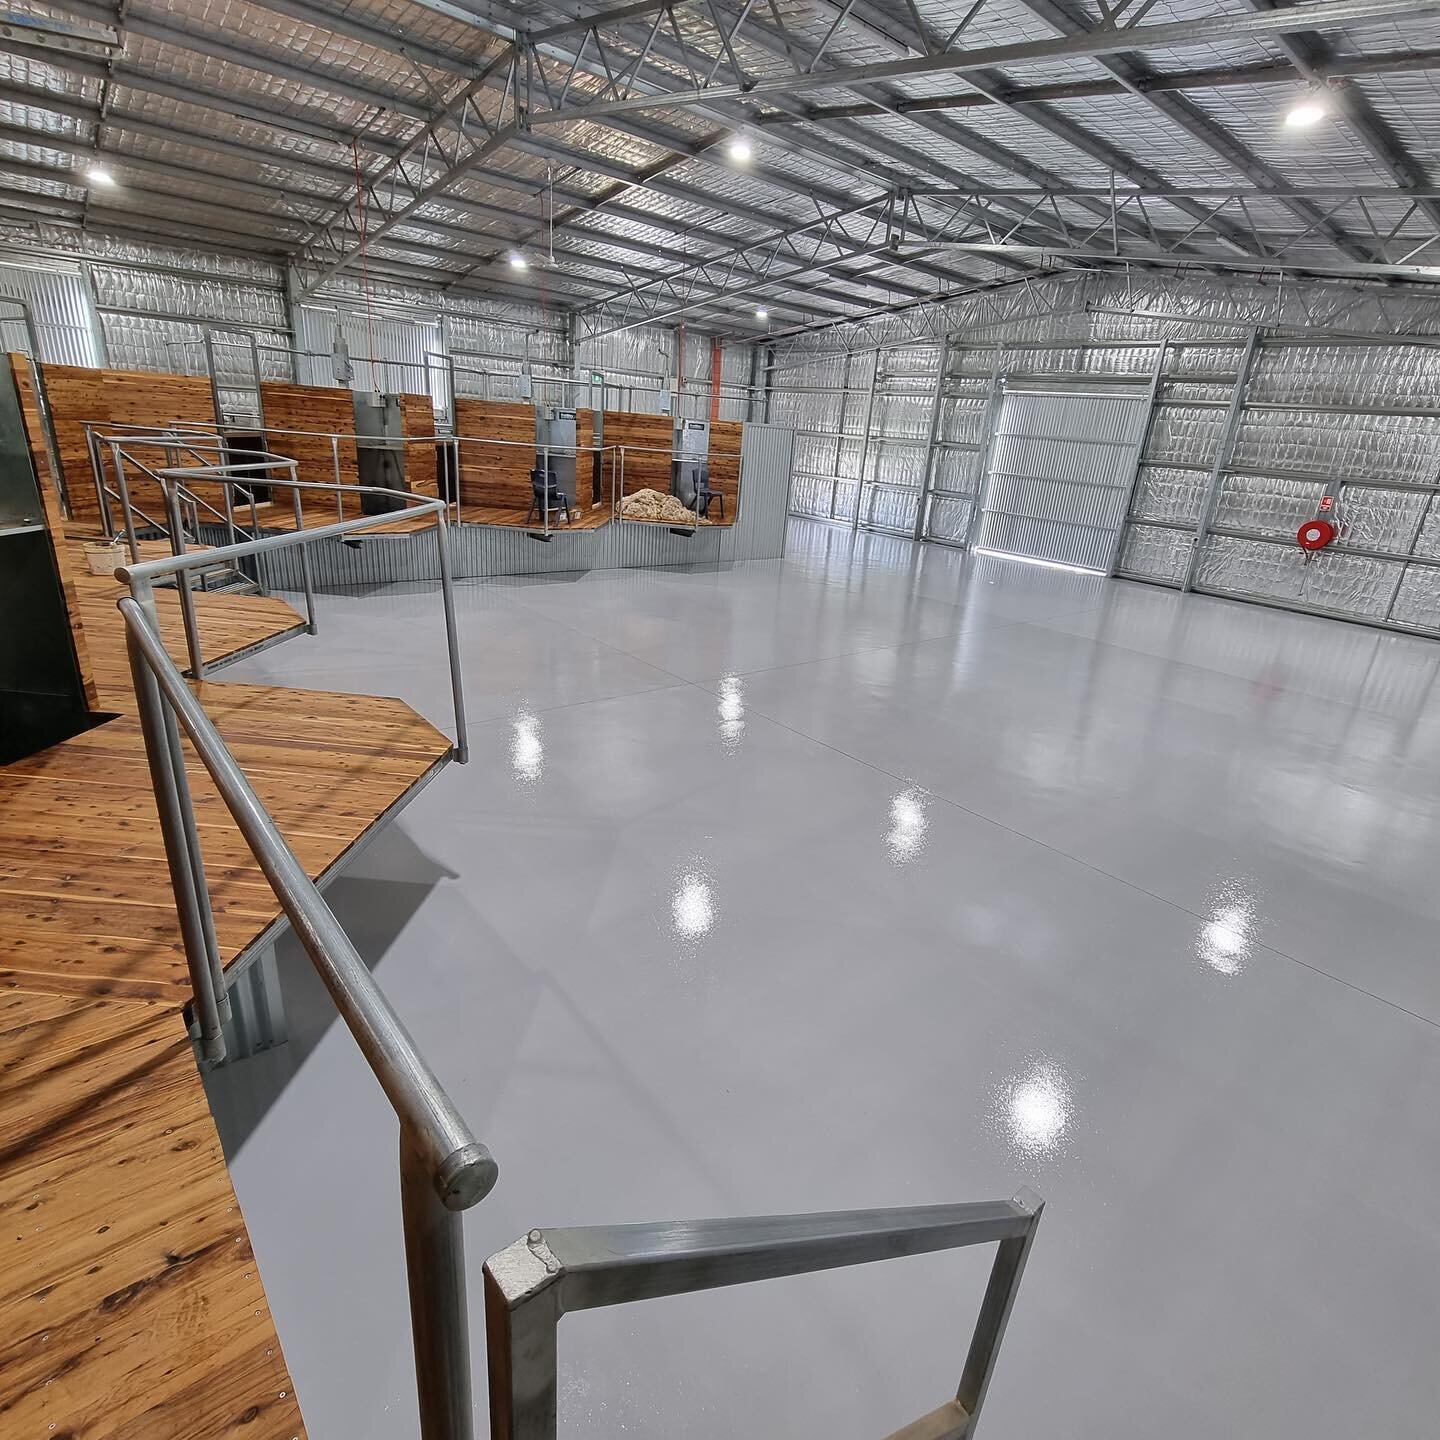 Our specialised concrete flooring team have recently finished this amazing floor at the Muresk Shearing Shed in Northam. 

This is all part of the works to modernise this essential agricultural training facility &amp; we are very proud to be a part o